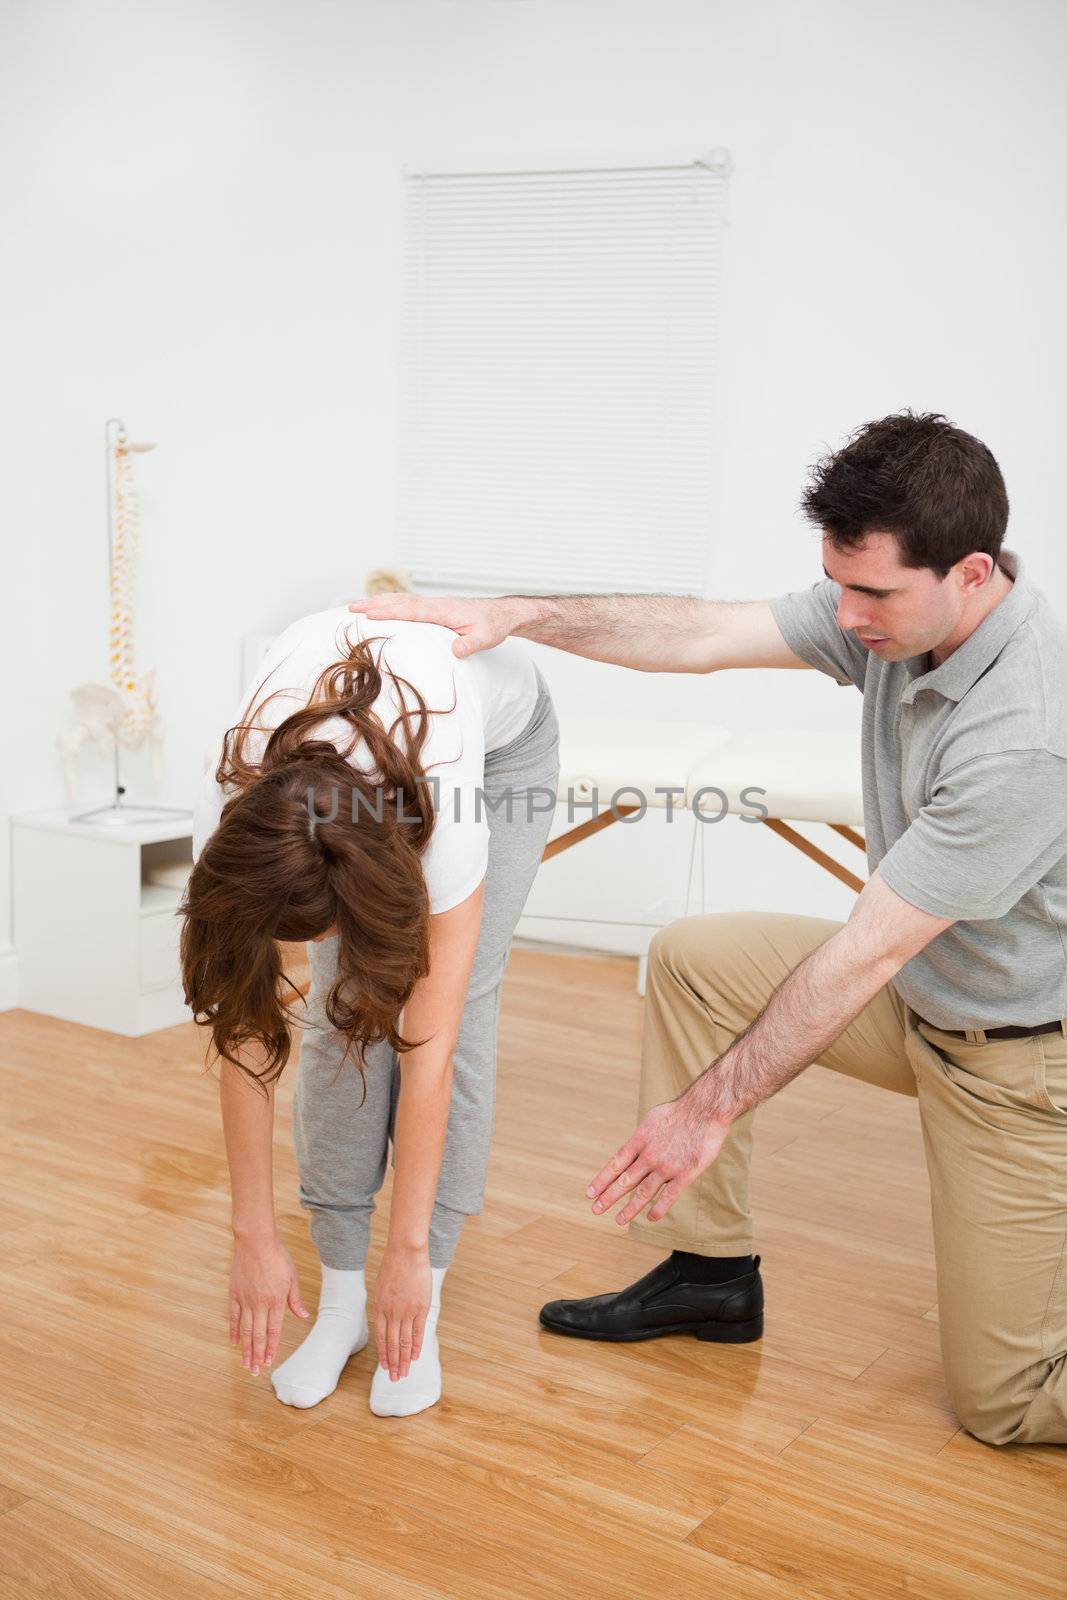 Doctor looking at a patient who is doing stretching exercises in a room